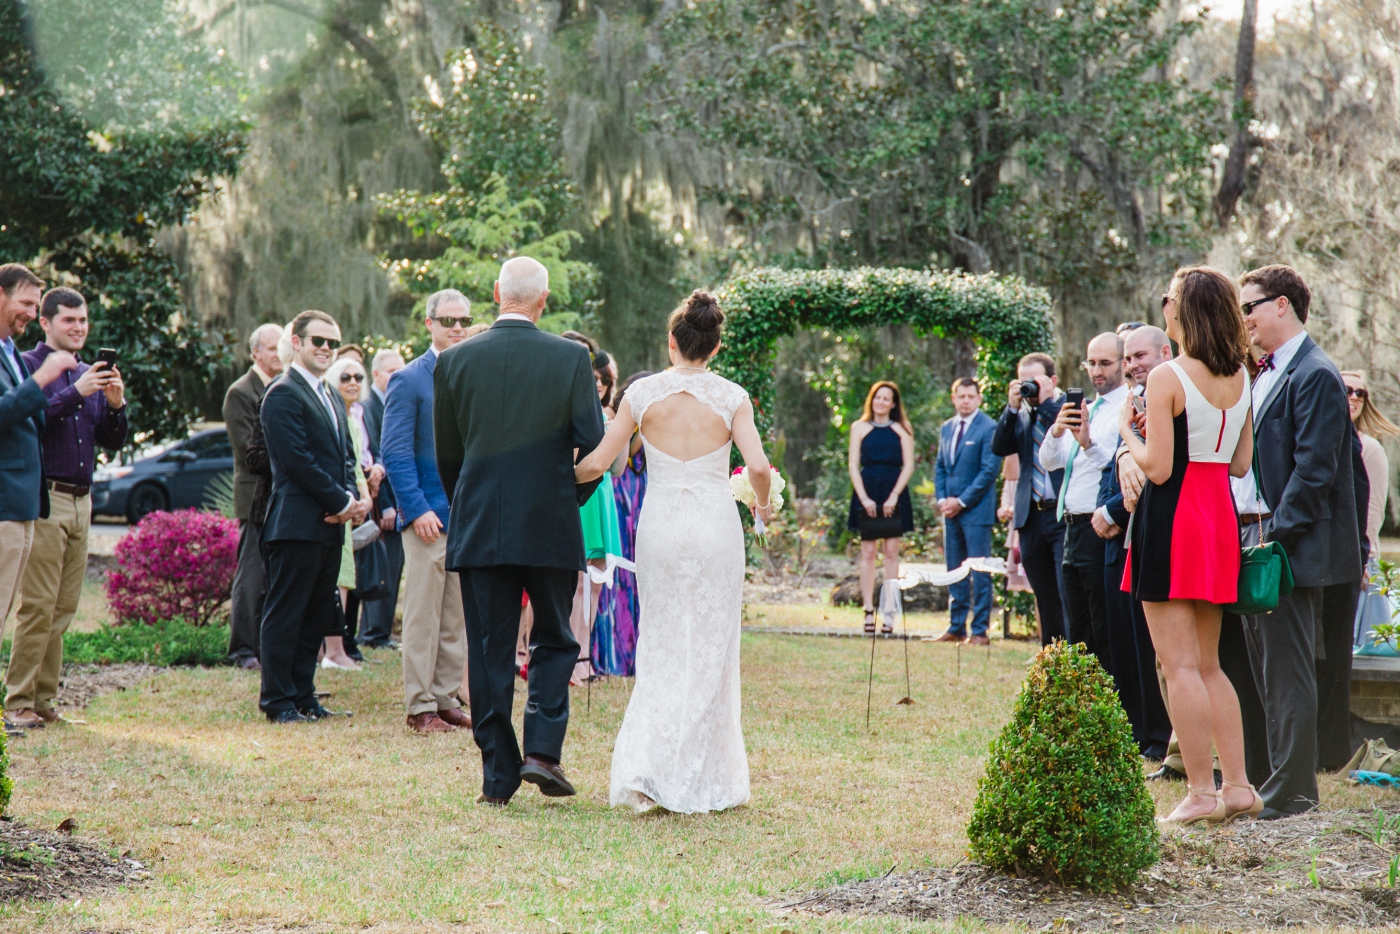 Sally and Carlier’s wedding ceremony at Bonaventure Cemetery